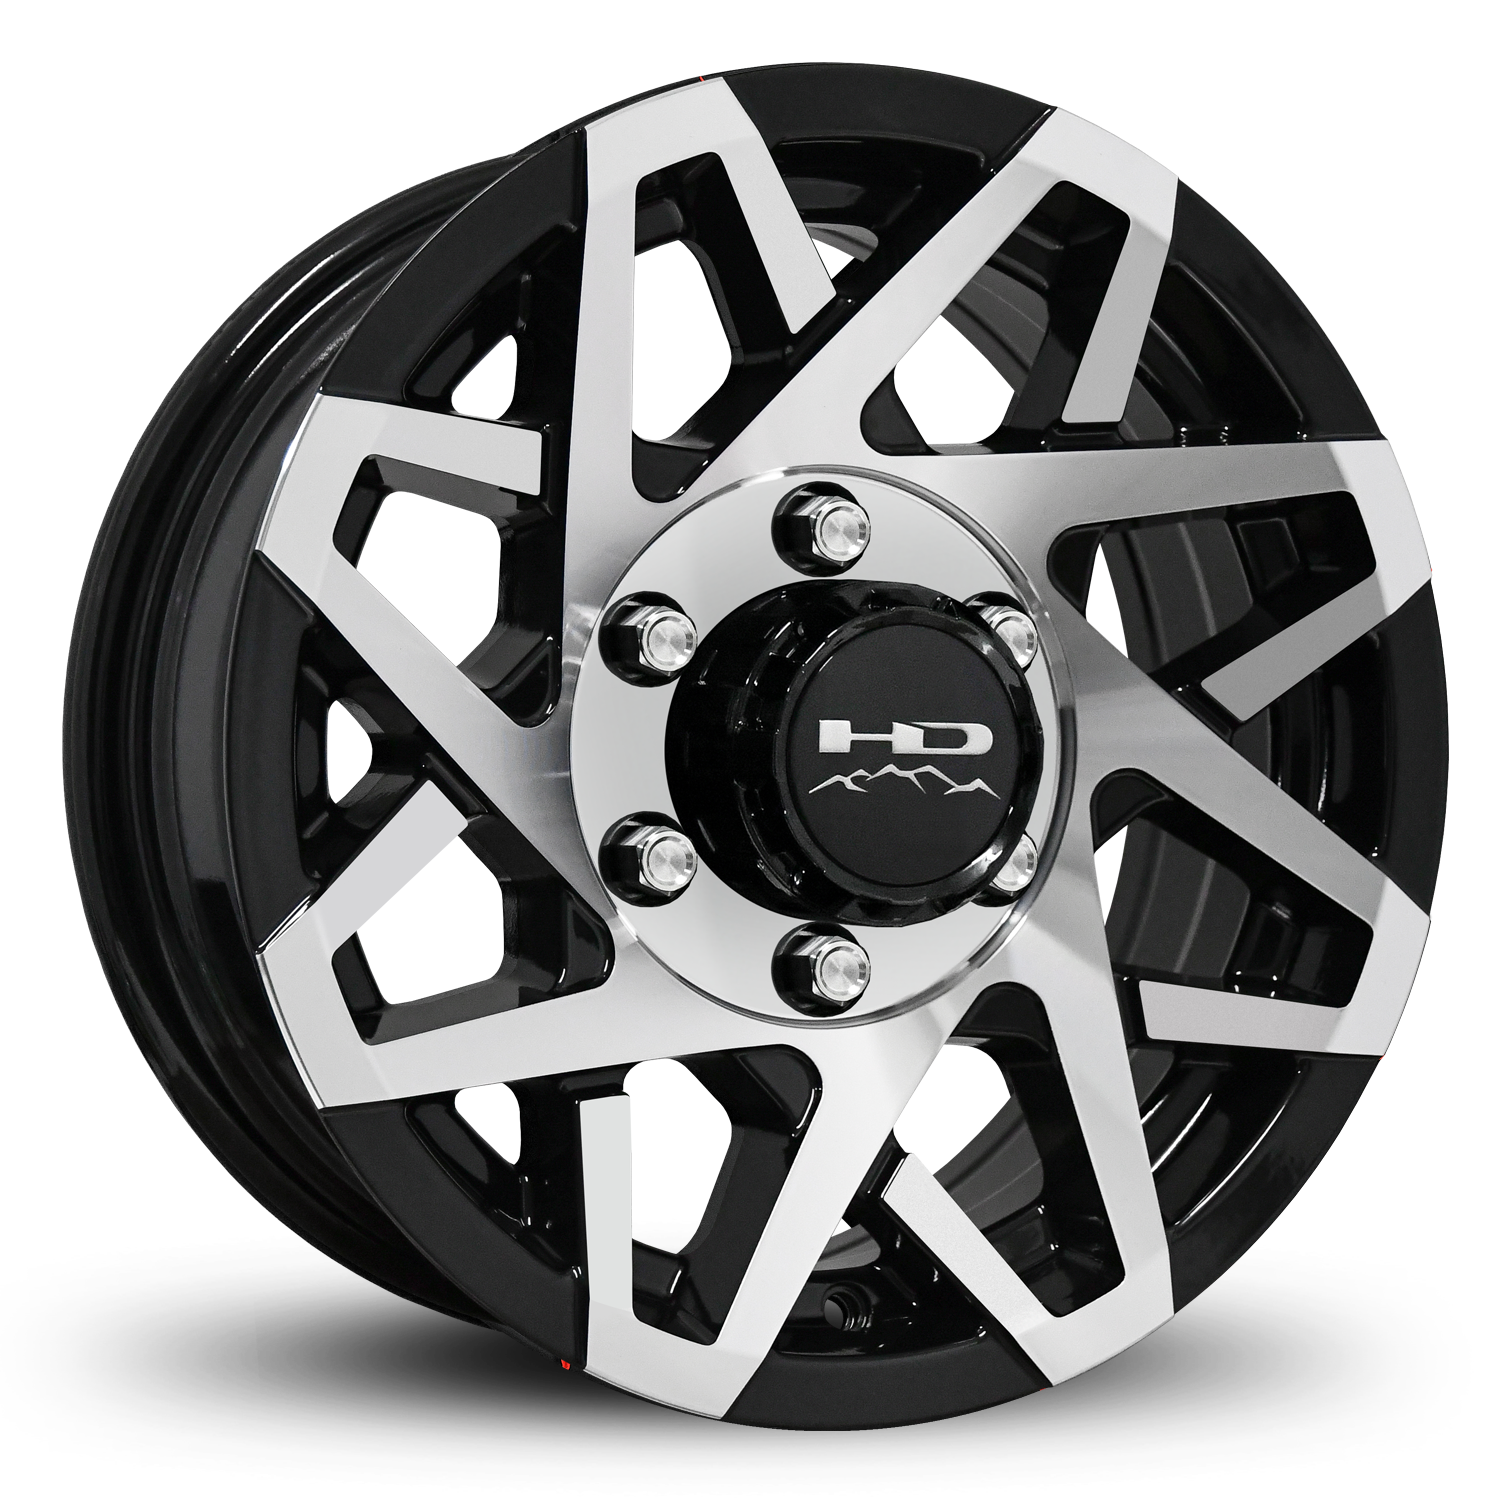 HD Off-Road Canyon Custom Trailer Wheel Rims in 15x6.0  15x6 Gloss Black Machined Face with Center Cap & Logo fits 6x5.50 / 6x139.7 Axle Boat, Car, RV, Travel, Concession, Horse, Utility, Lawn & Garden, & Landscaping.